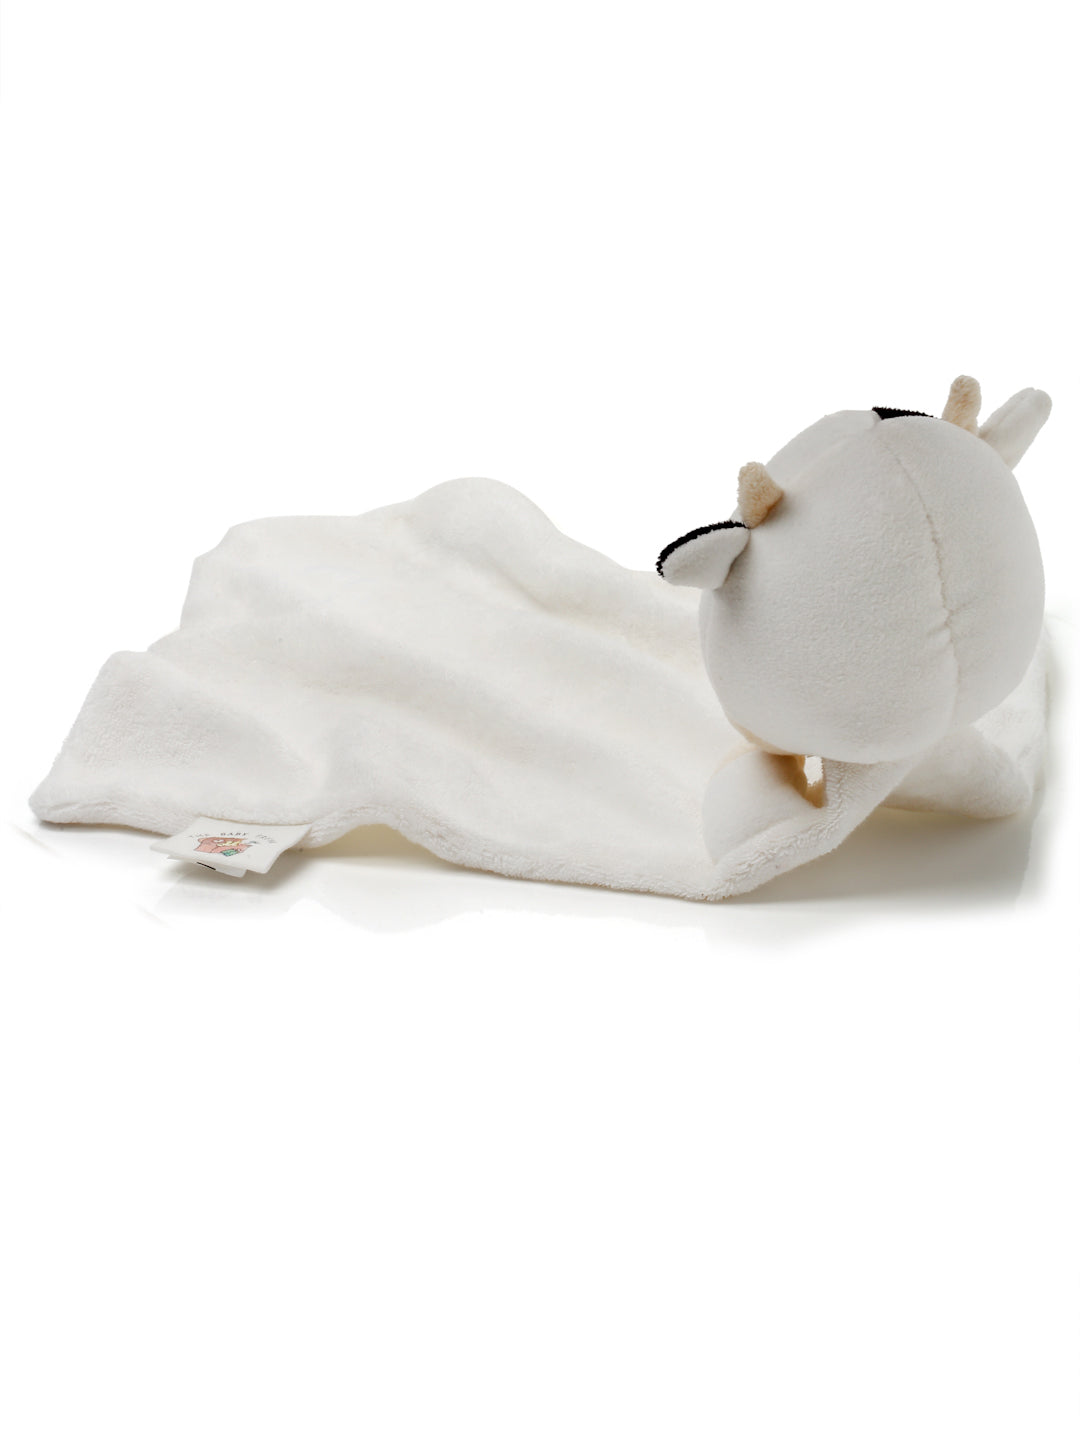 Cow Security blanket toy